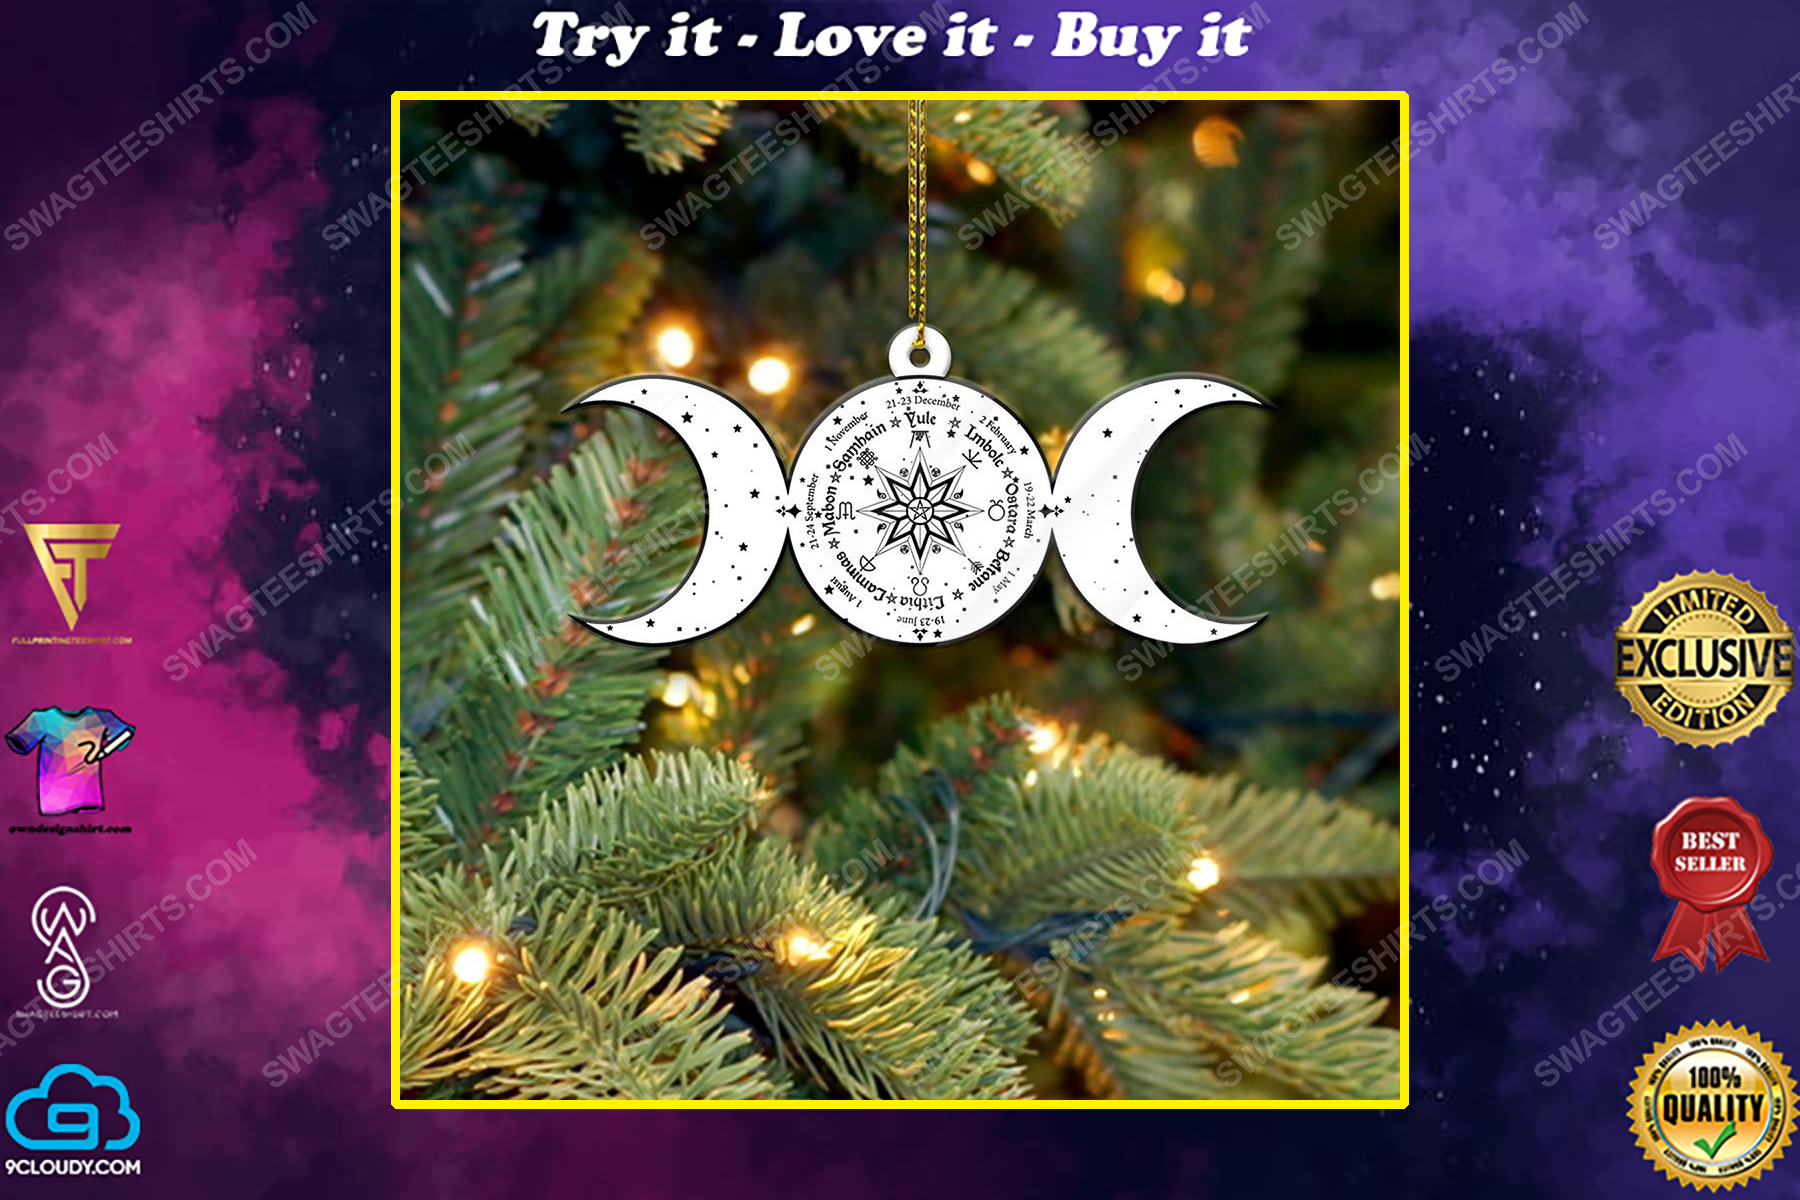 Triple moon and wheel of the year christmas gift ornament